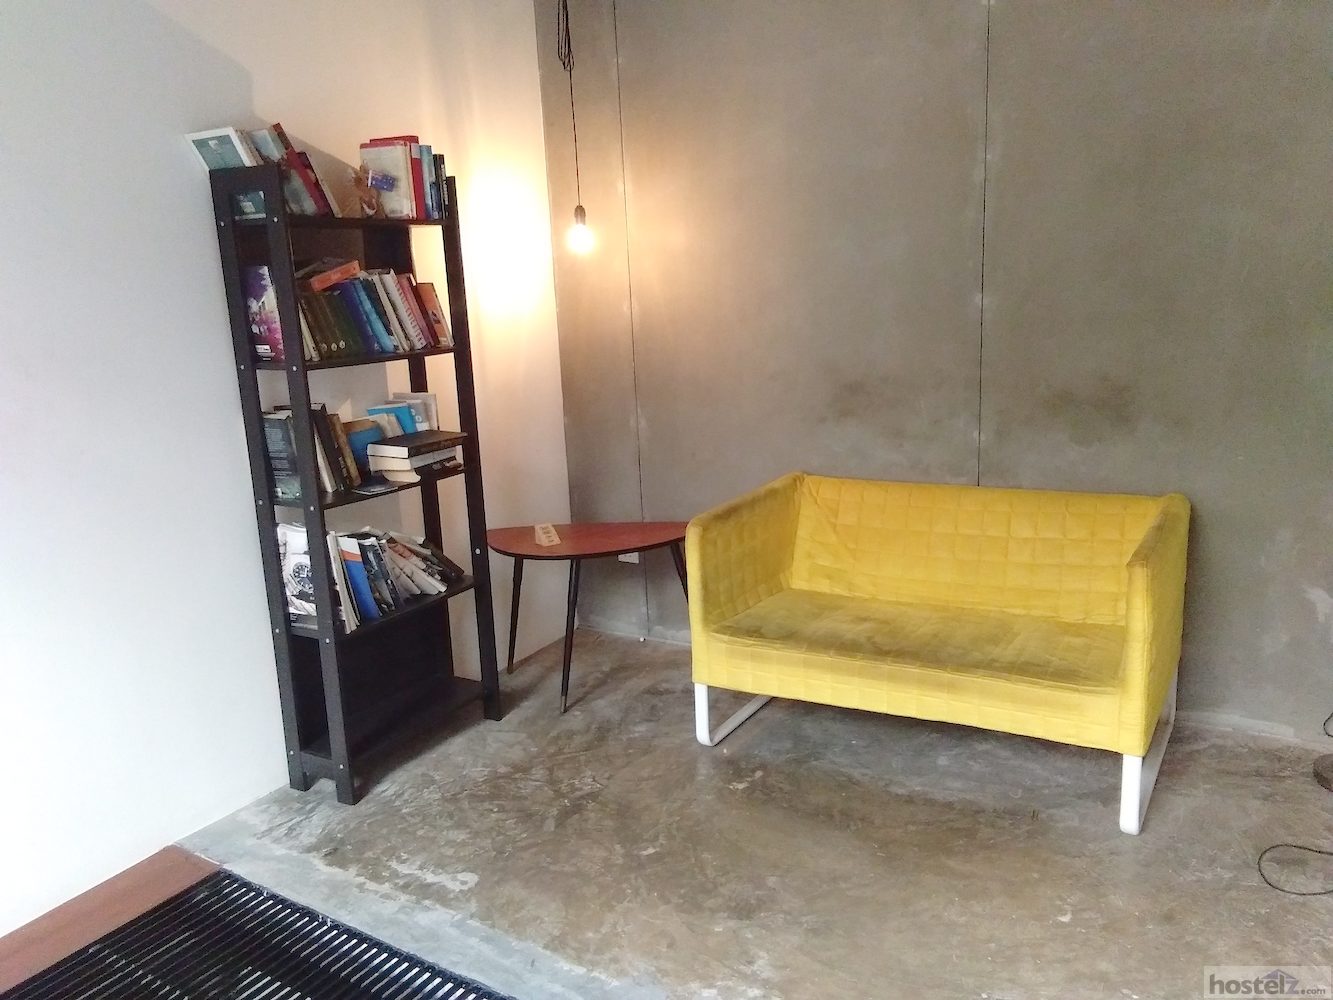 The Frame Guesthouse, Penang Island